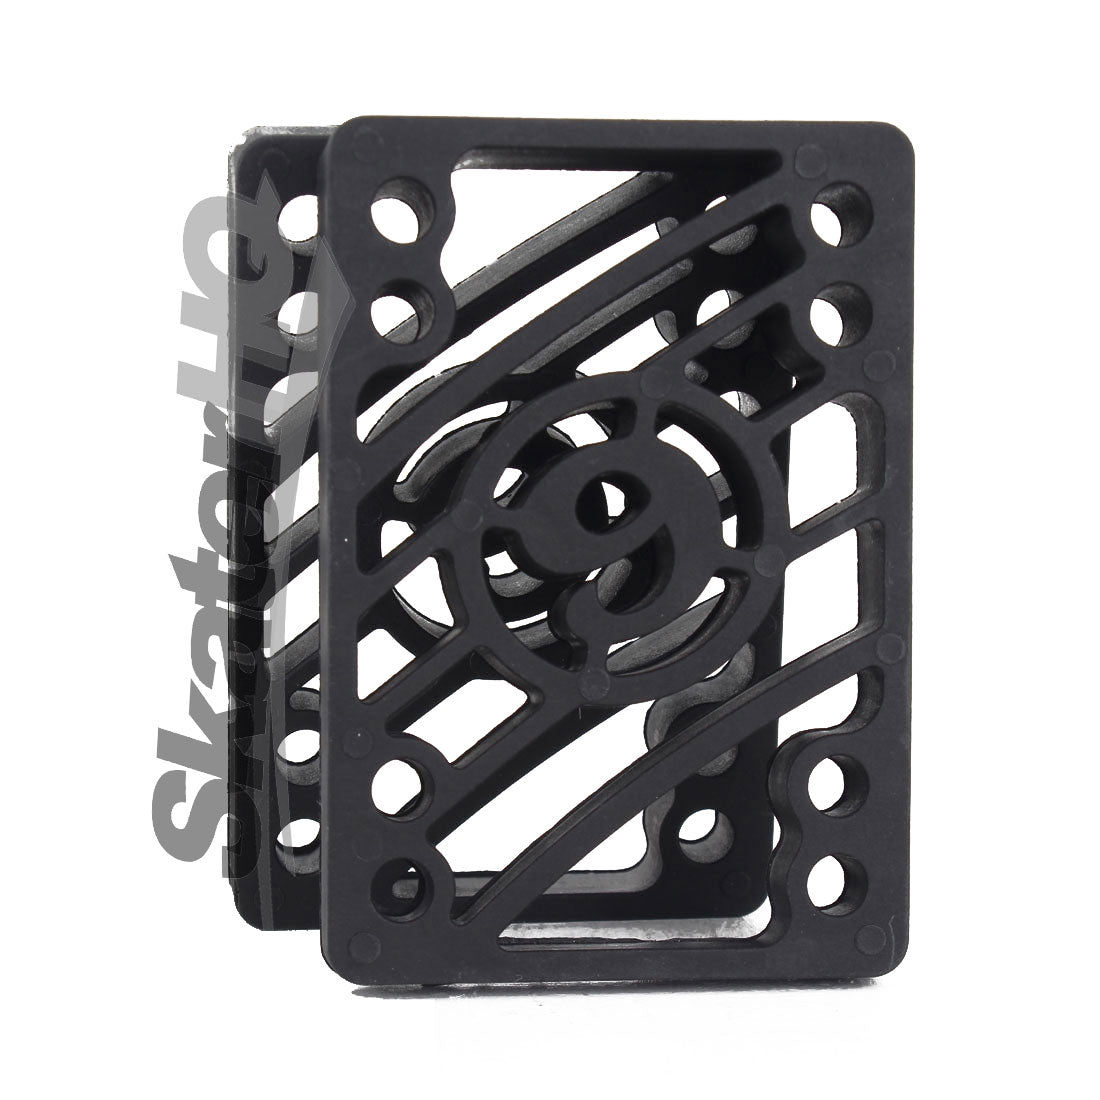 Sector 9 Angled Riser Pads 2pk - Black Skateboard Hardware and Parts